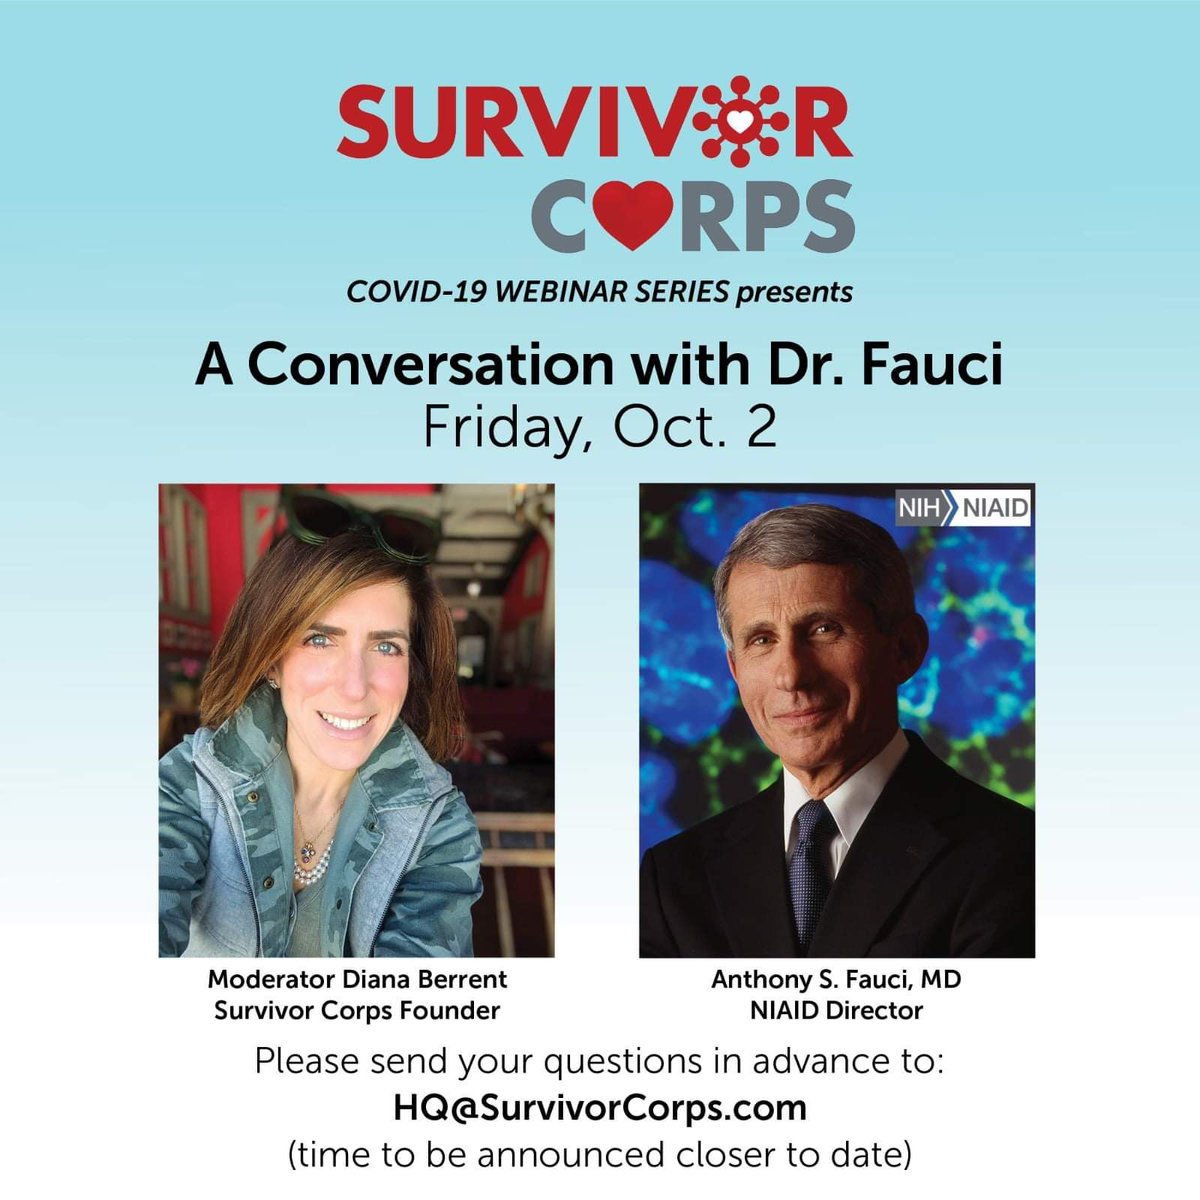 This is groundbreaking acknowledgement of  #LongCovid. Please join us at  @Survivor_Corps for this event with Dr. Fauci. It will be free, open to all to submit questions and it will be on the record.This is a major step forward for Covid Long Haulers everywhere! #CountLongCovid